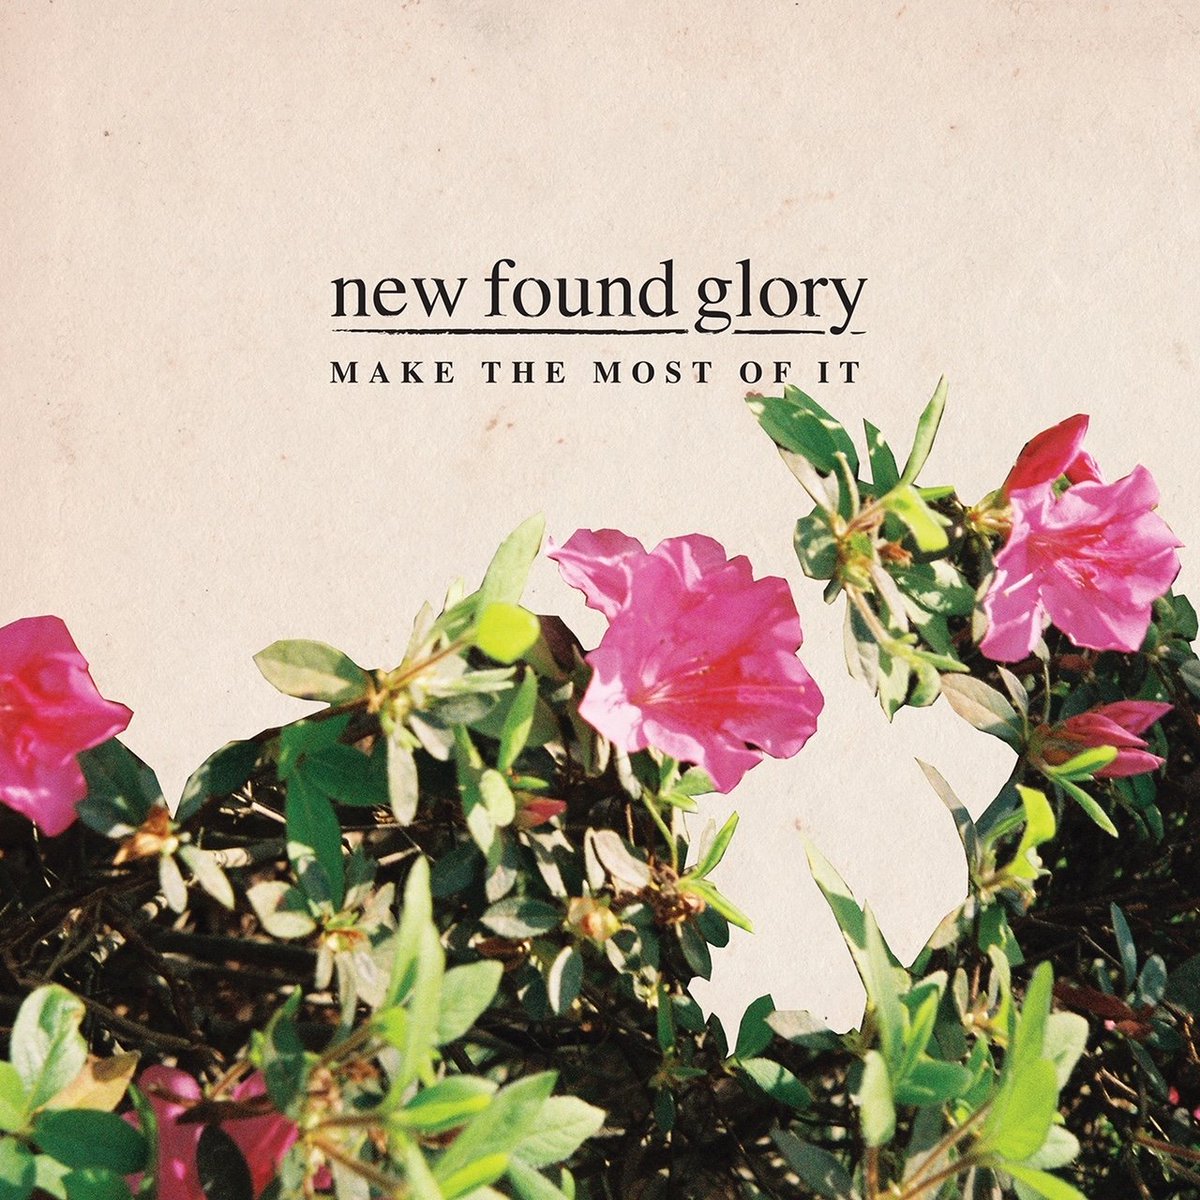 floral cover art for New Found Glory’s album “Make the Most of It”